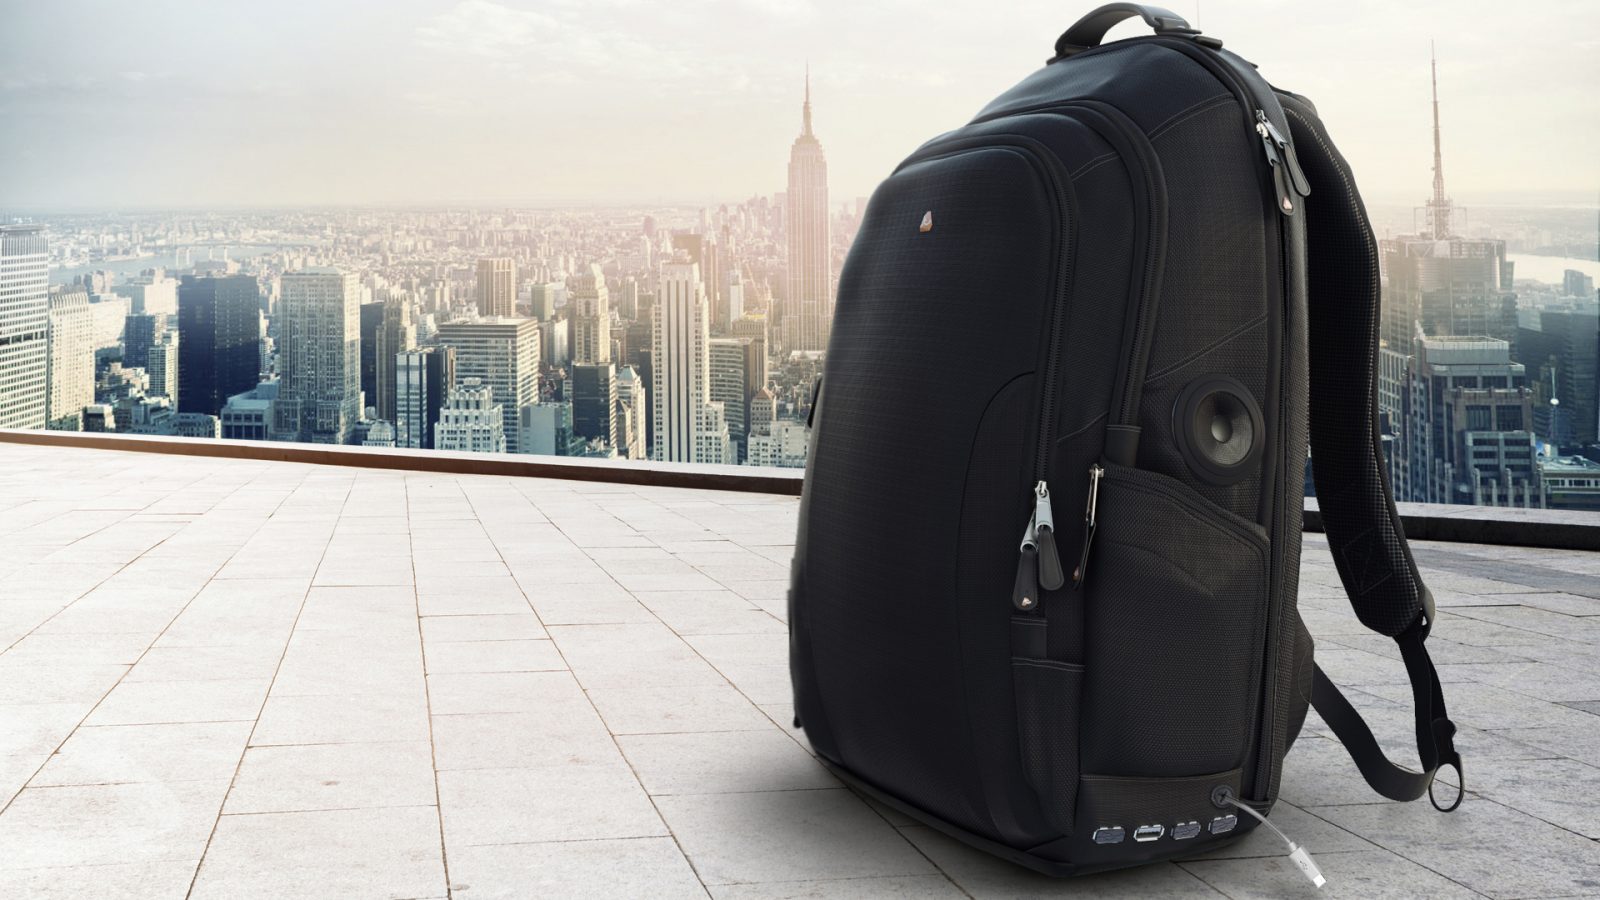 The FTC is investigating the crowdfunding campaign for iBackPack